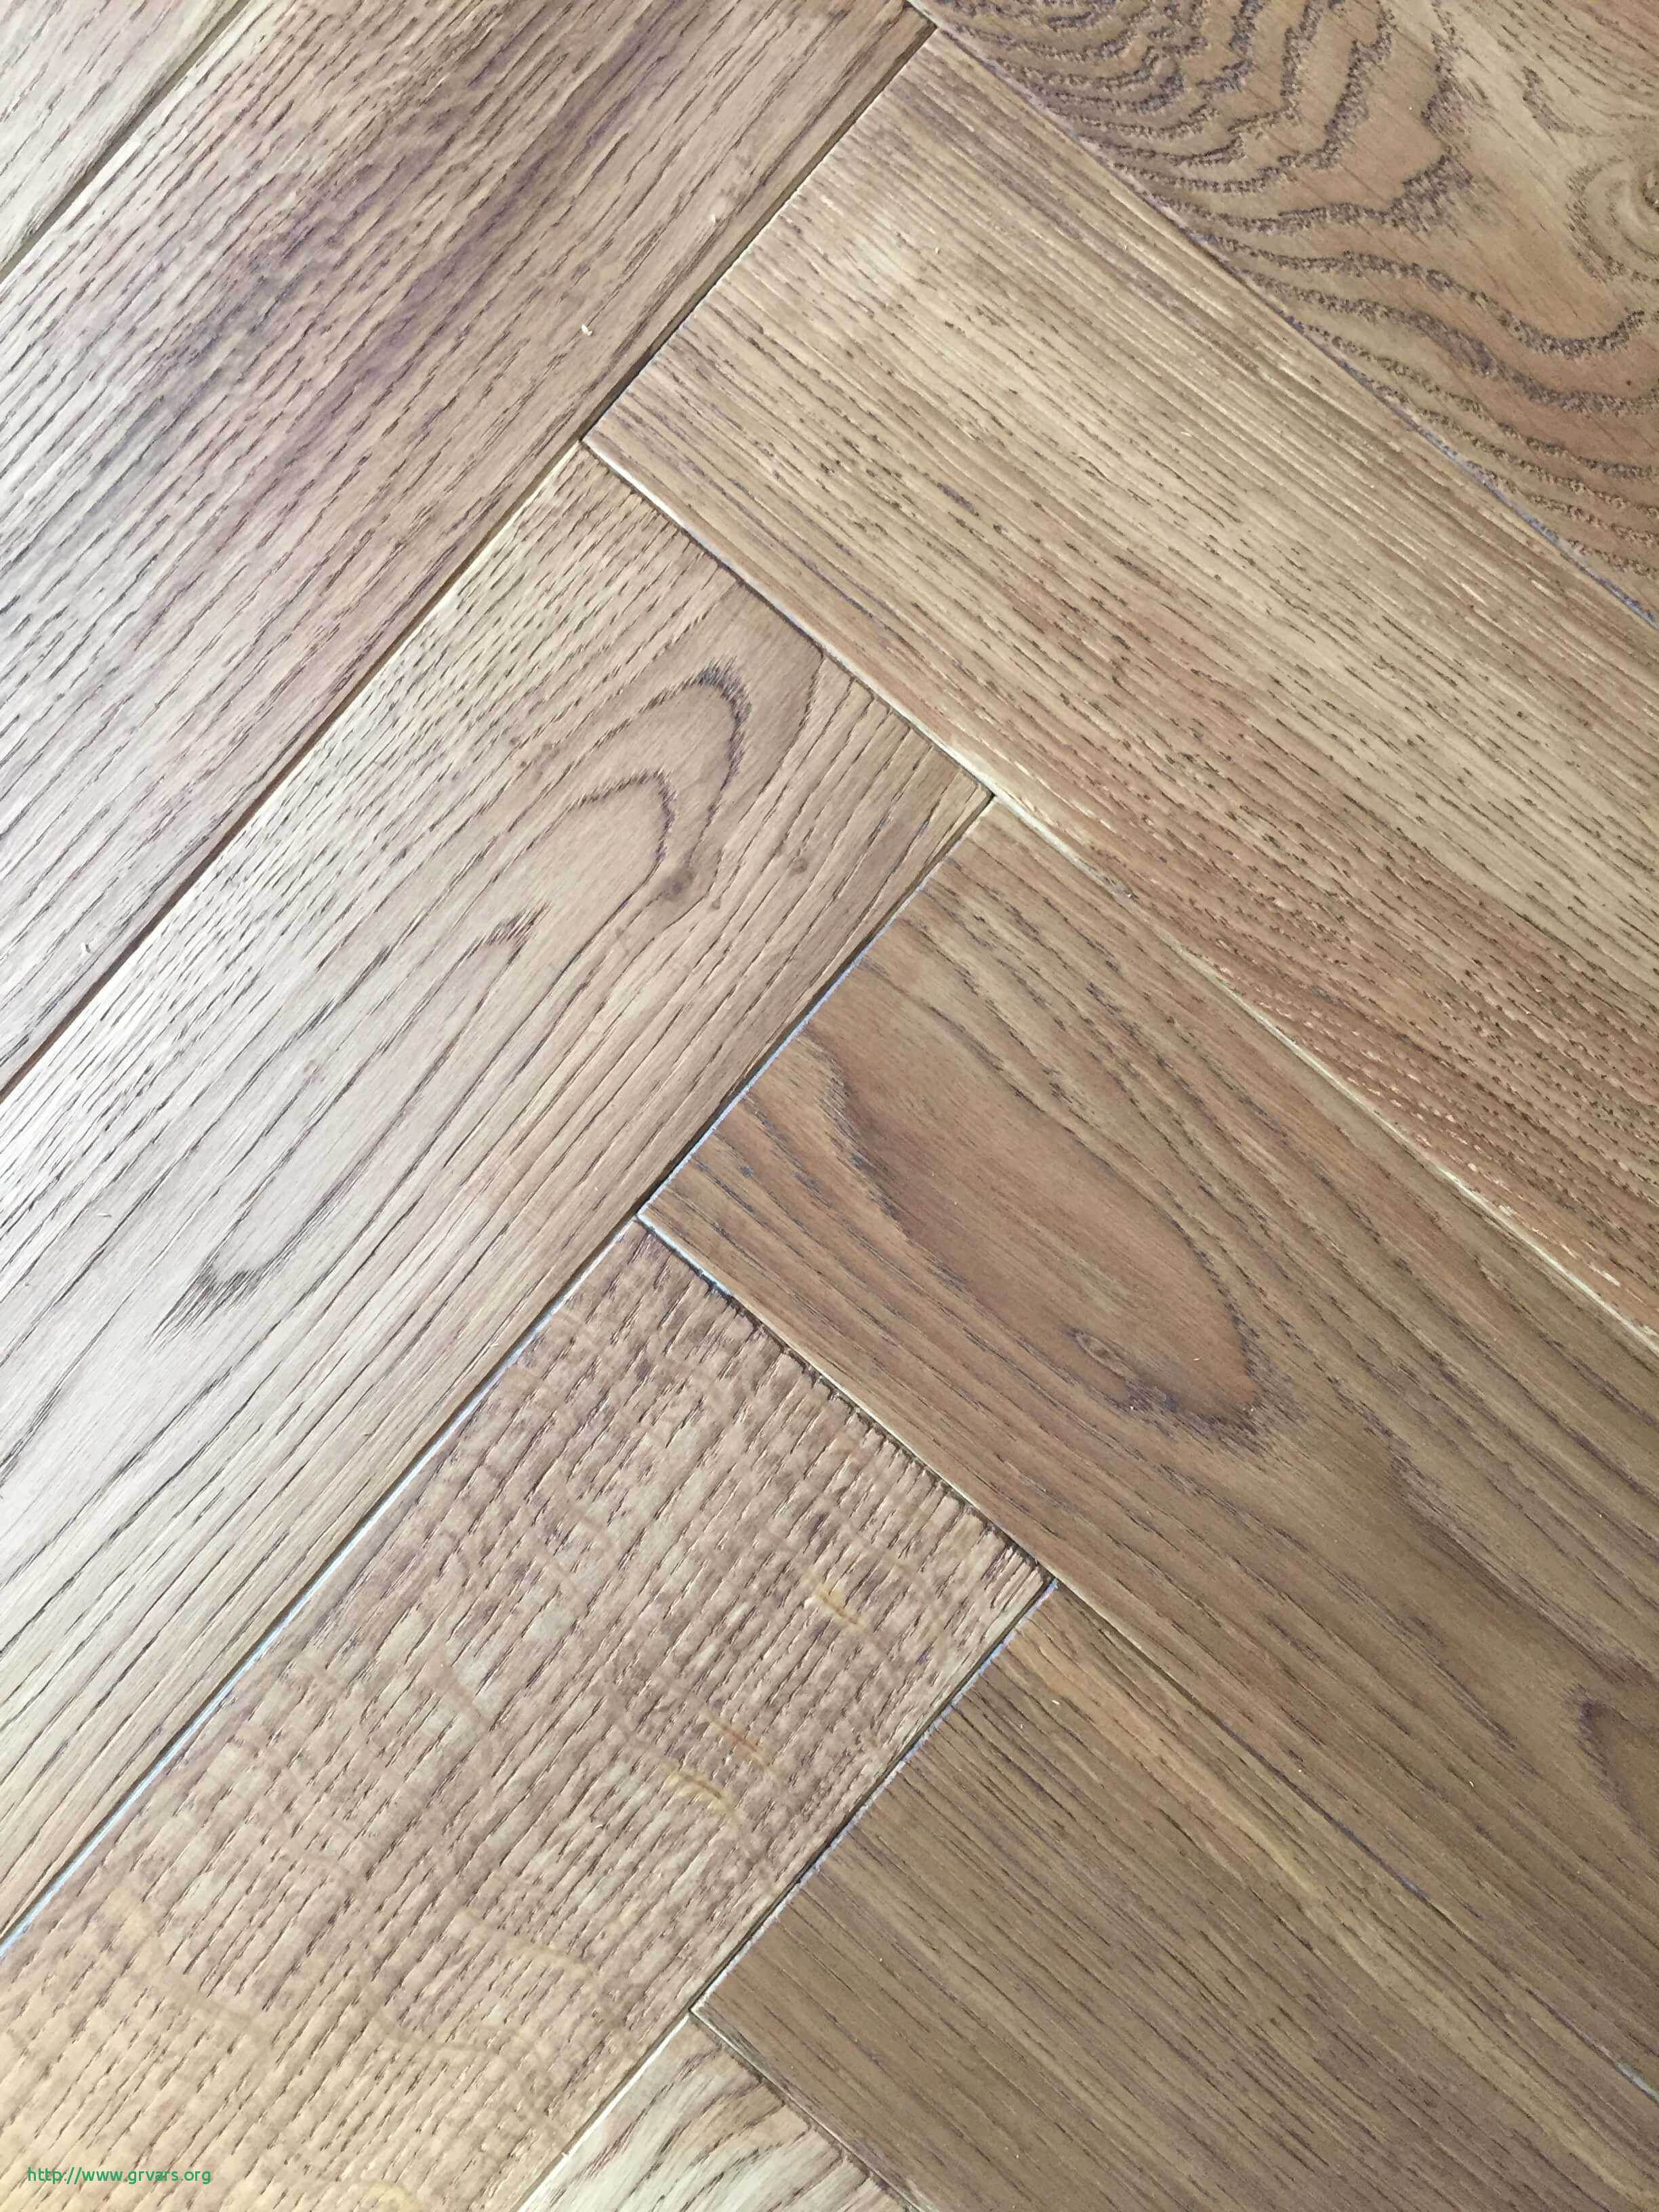 17 Fantastic Hardwood Floor Transition From Room To Room Unique